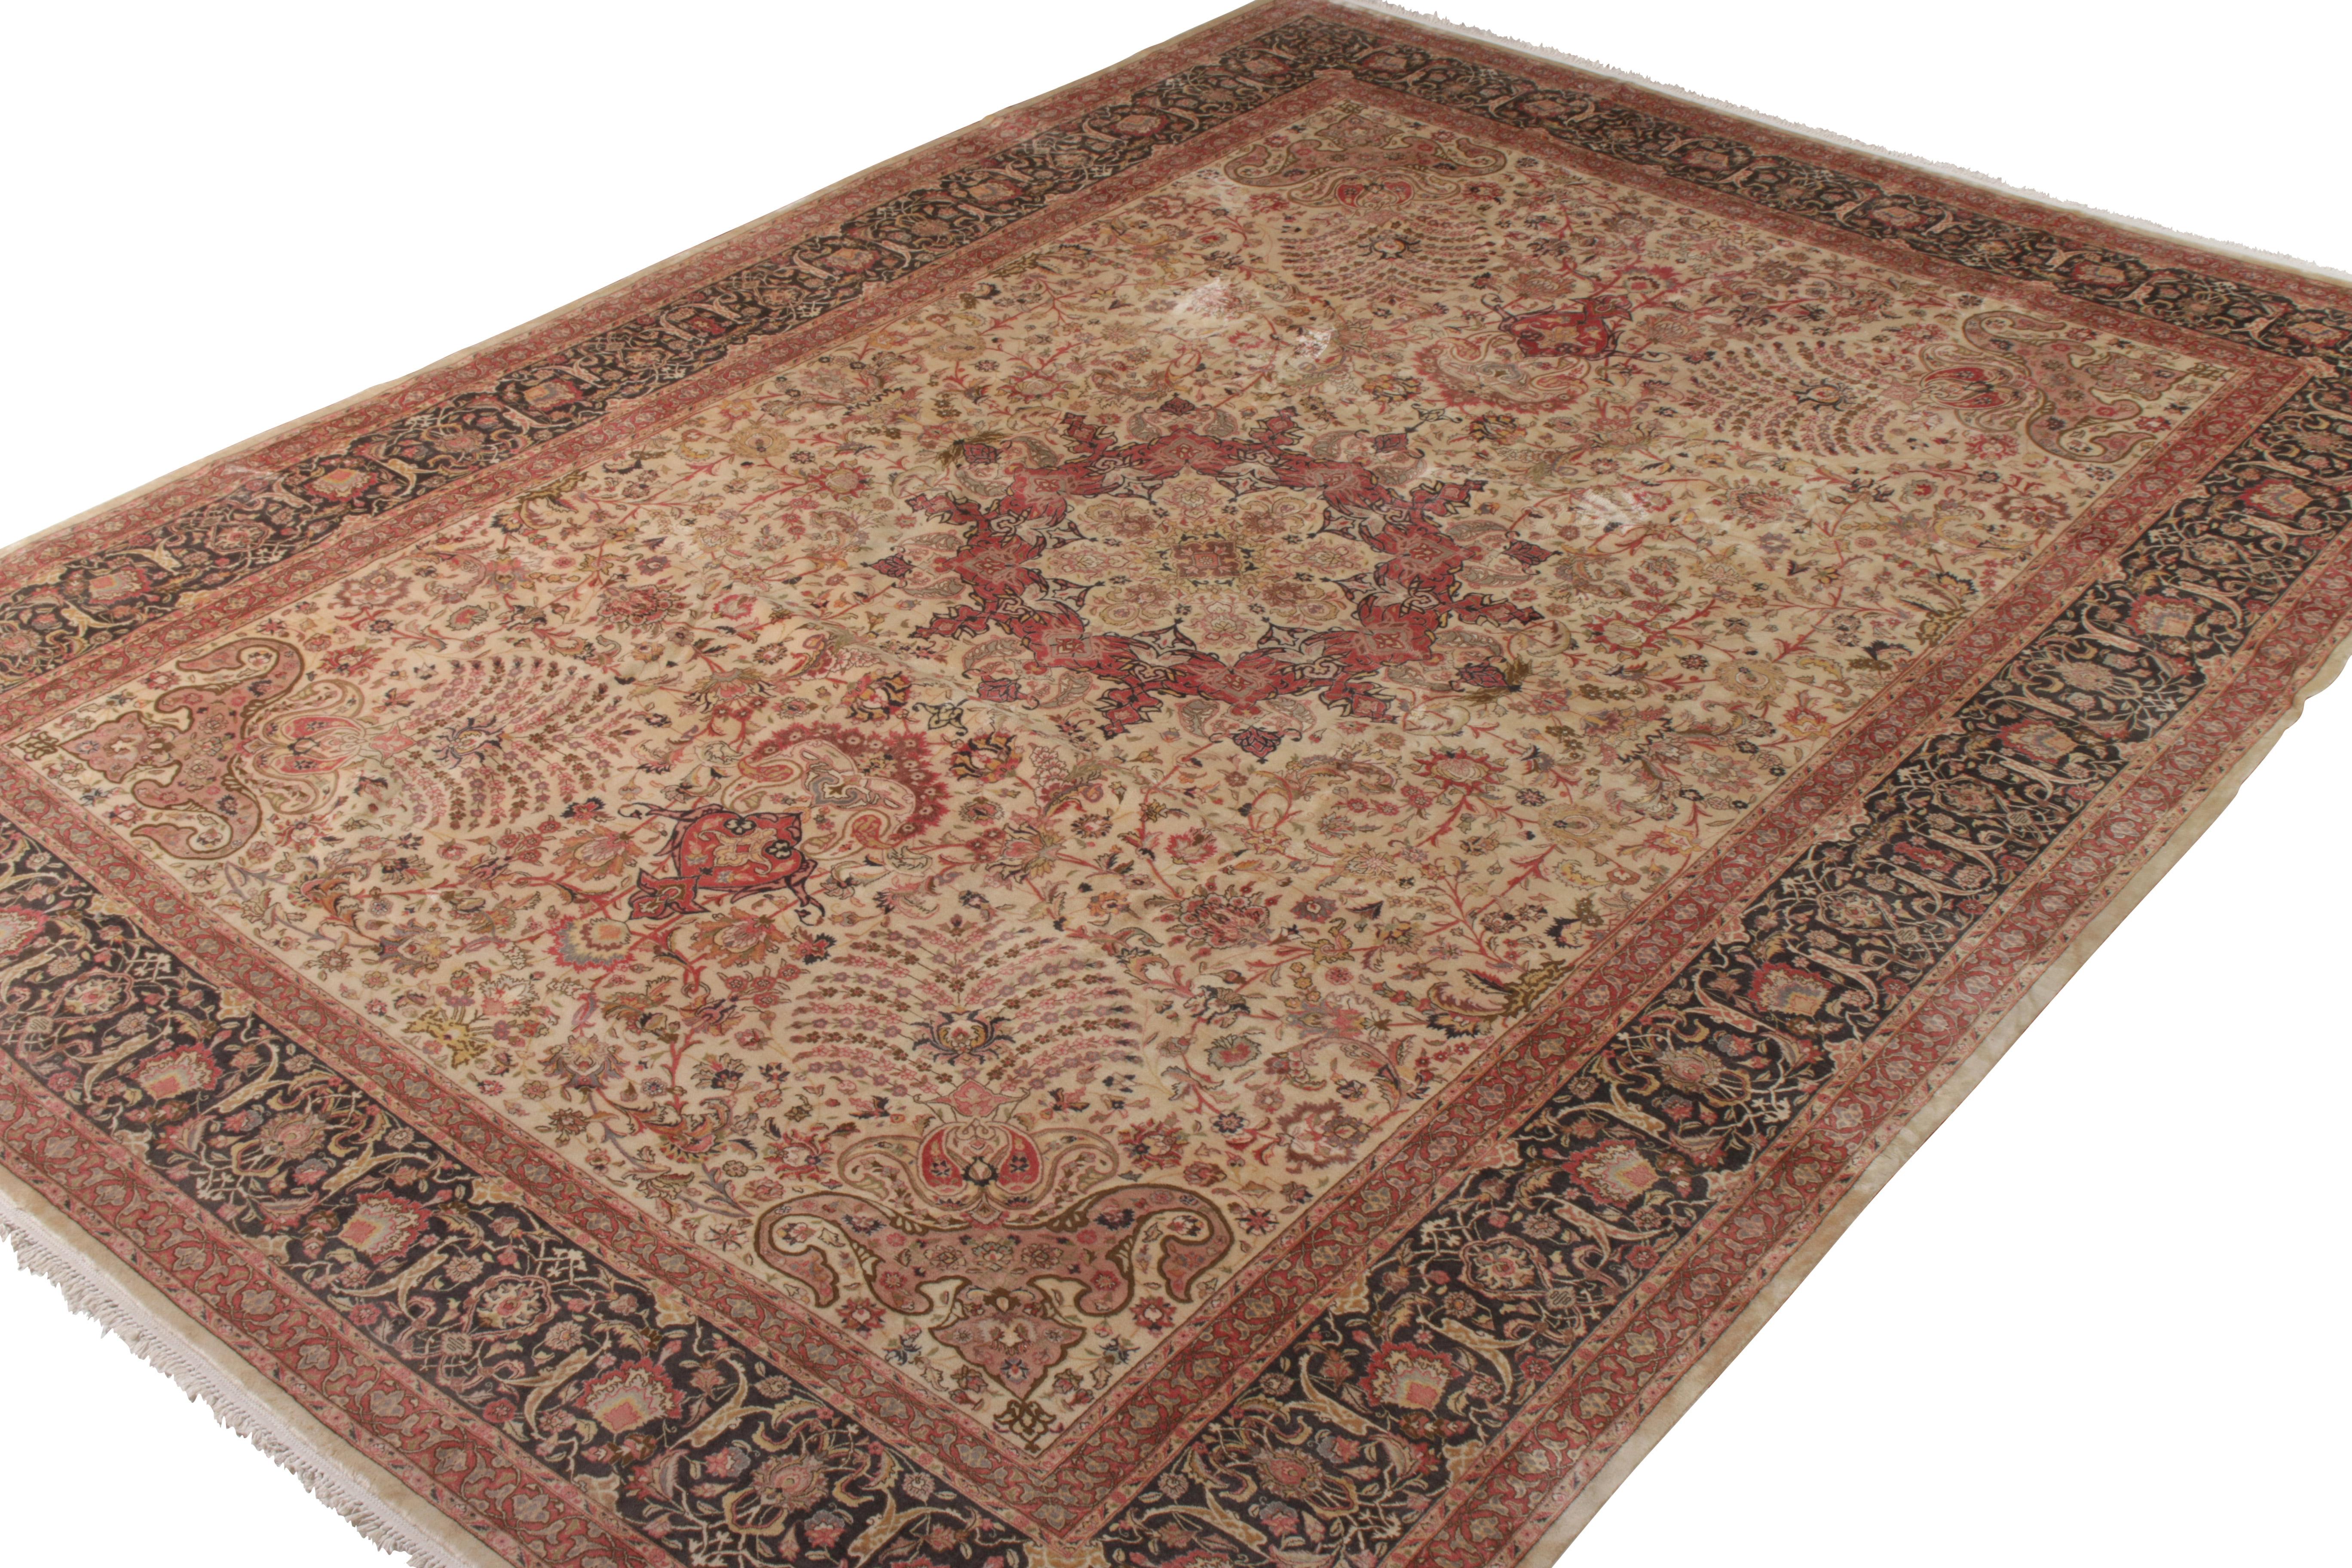 Hand knotted in wool originating circa 1950-1960, this 11 x 15 vintage Persian rug connotes a midcentury Tabriz rug style of fabulous color and regal pattern—hues of pink and red in majestic floral patterns played against beige to enfold a Classic